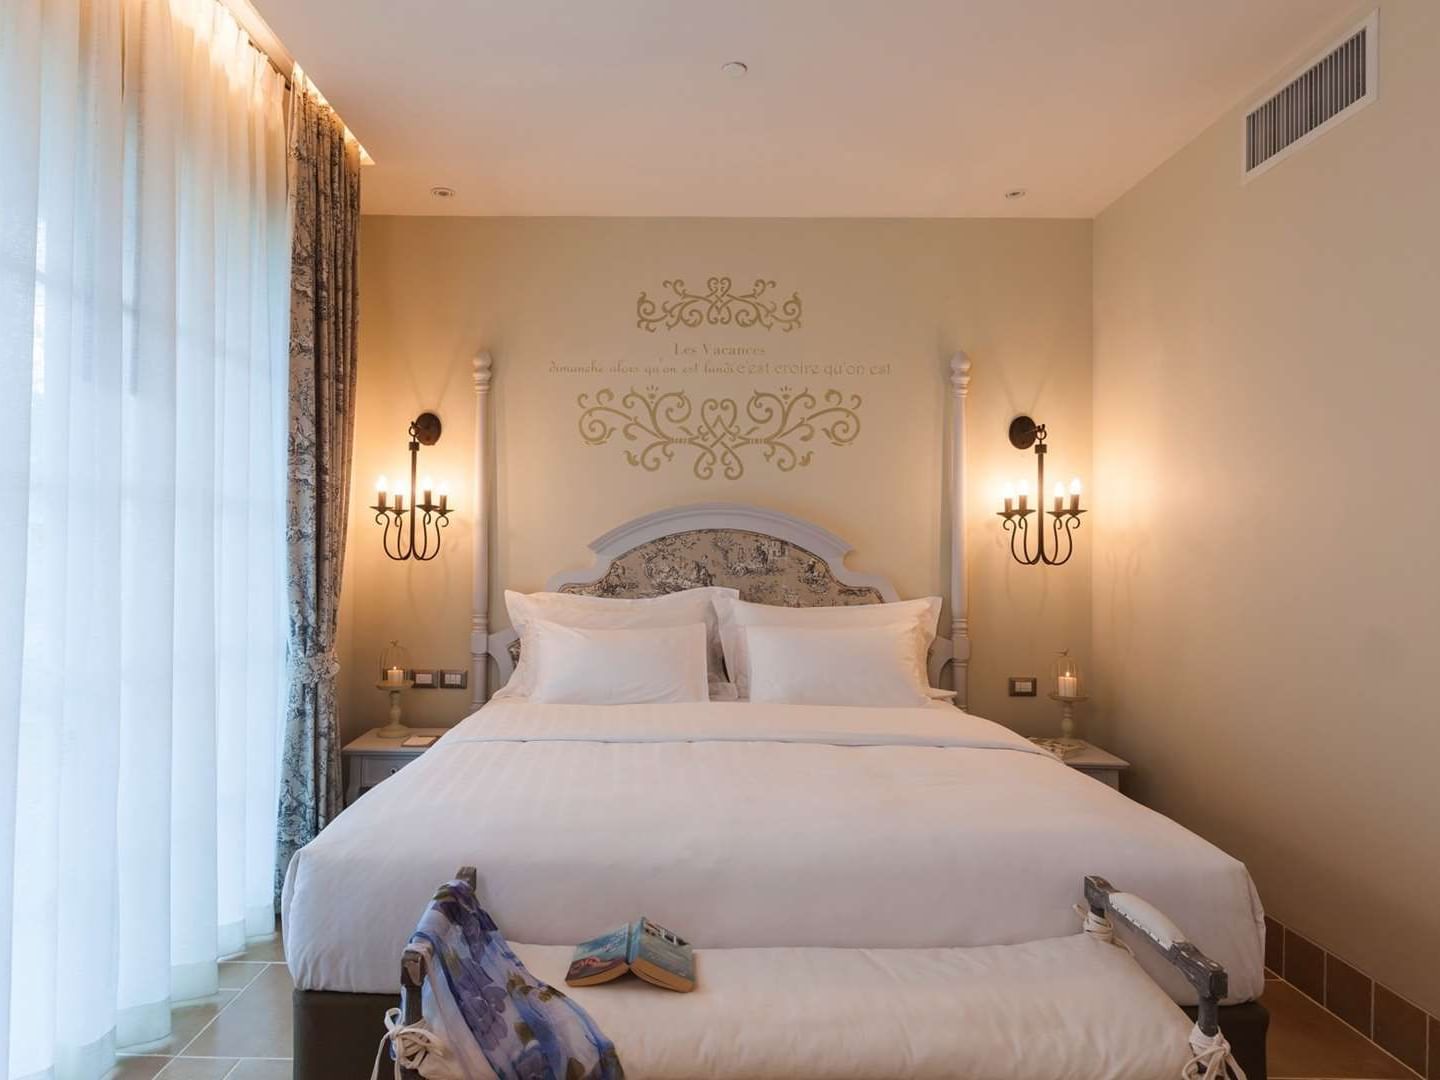 King size bed and wall lamps in Suite at U Hotels and Resorts